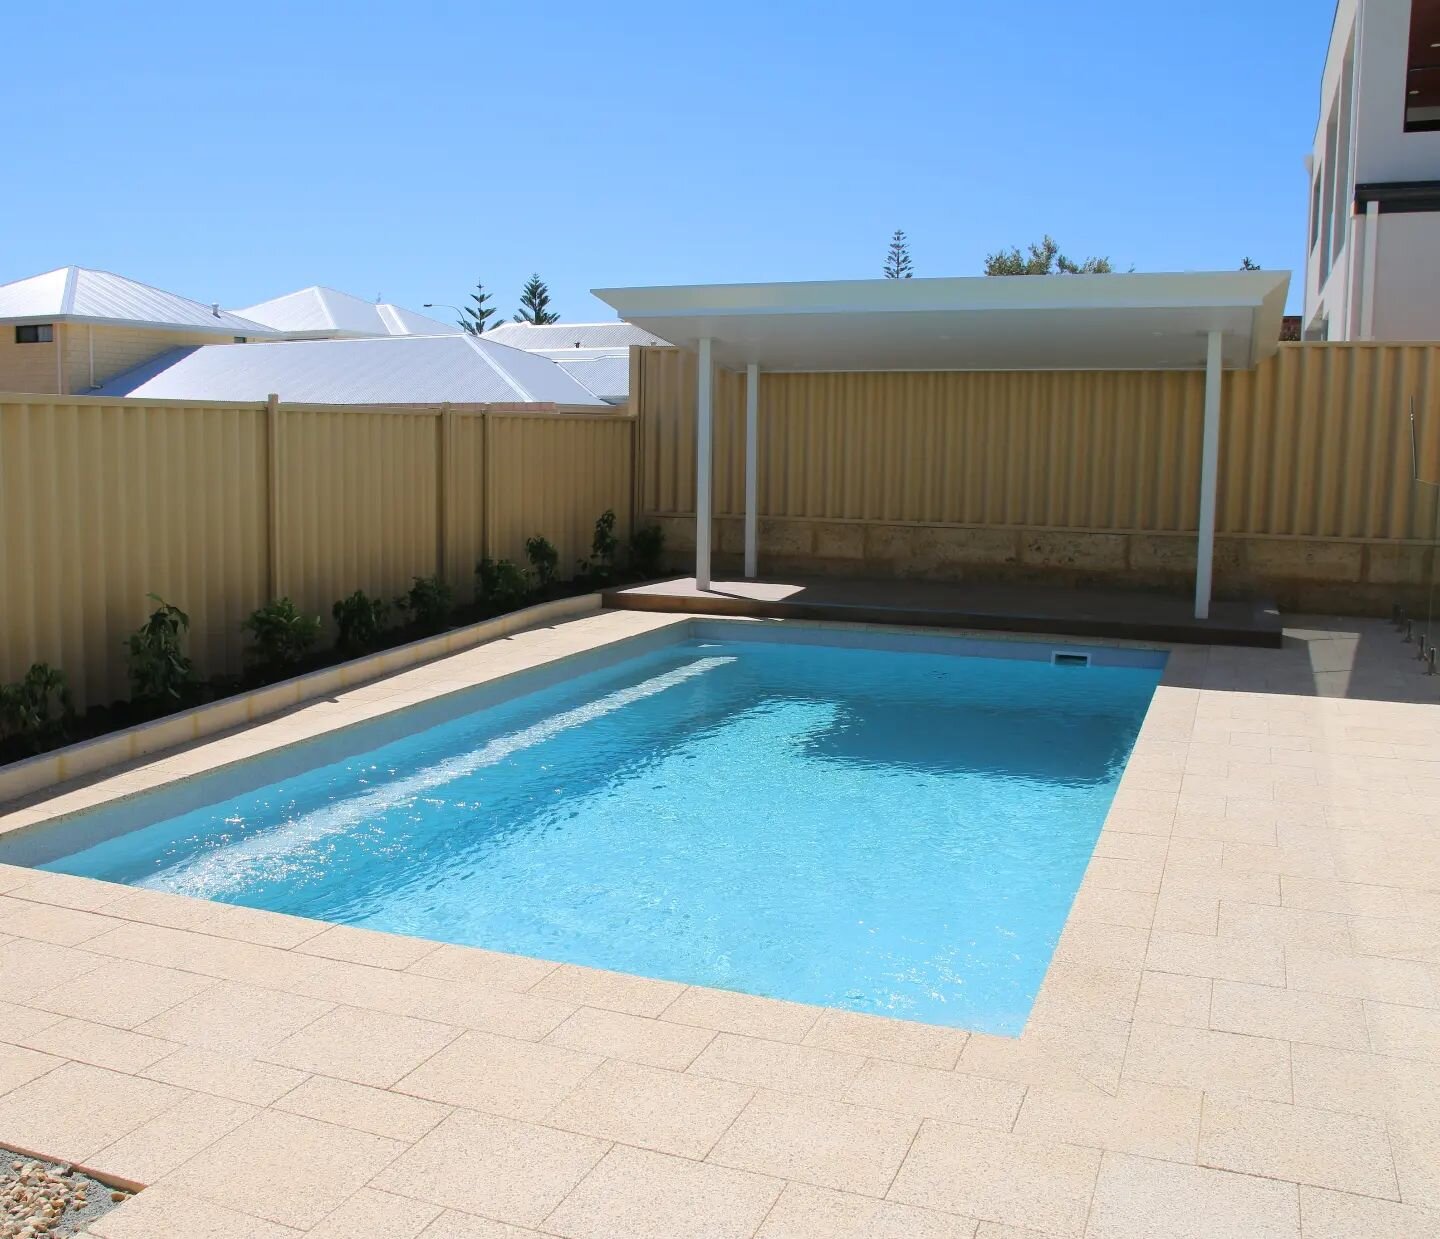 | Iluka | flash back to this complete poolside project. Jarrah paving is a great substitute for decking complementing the pool paving perfectly.